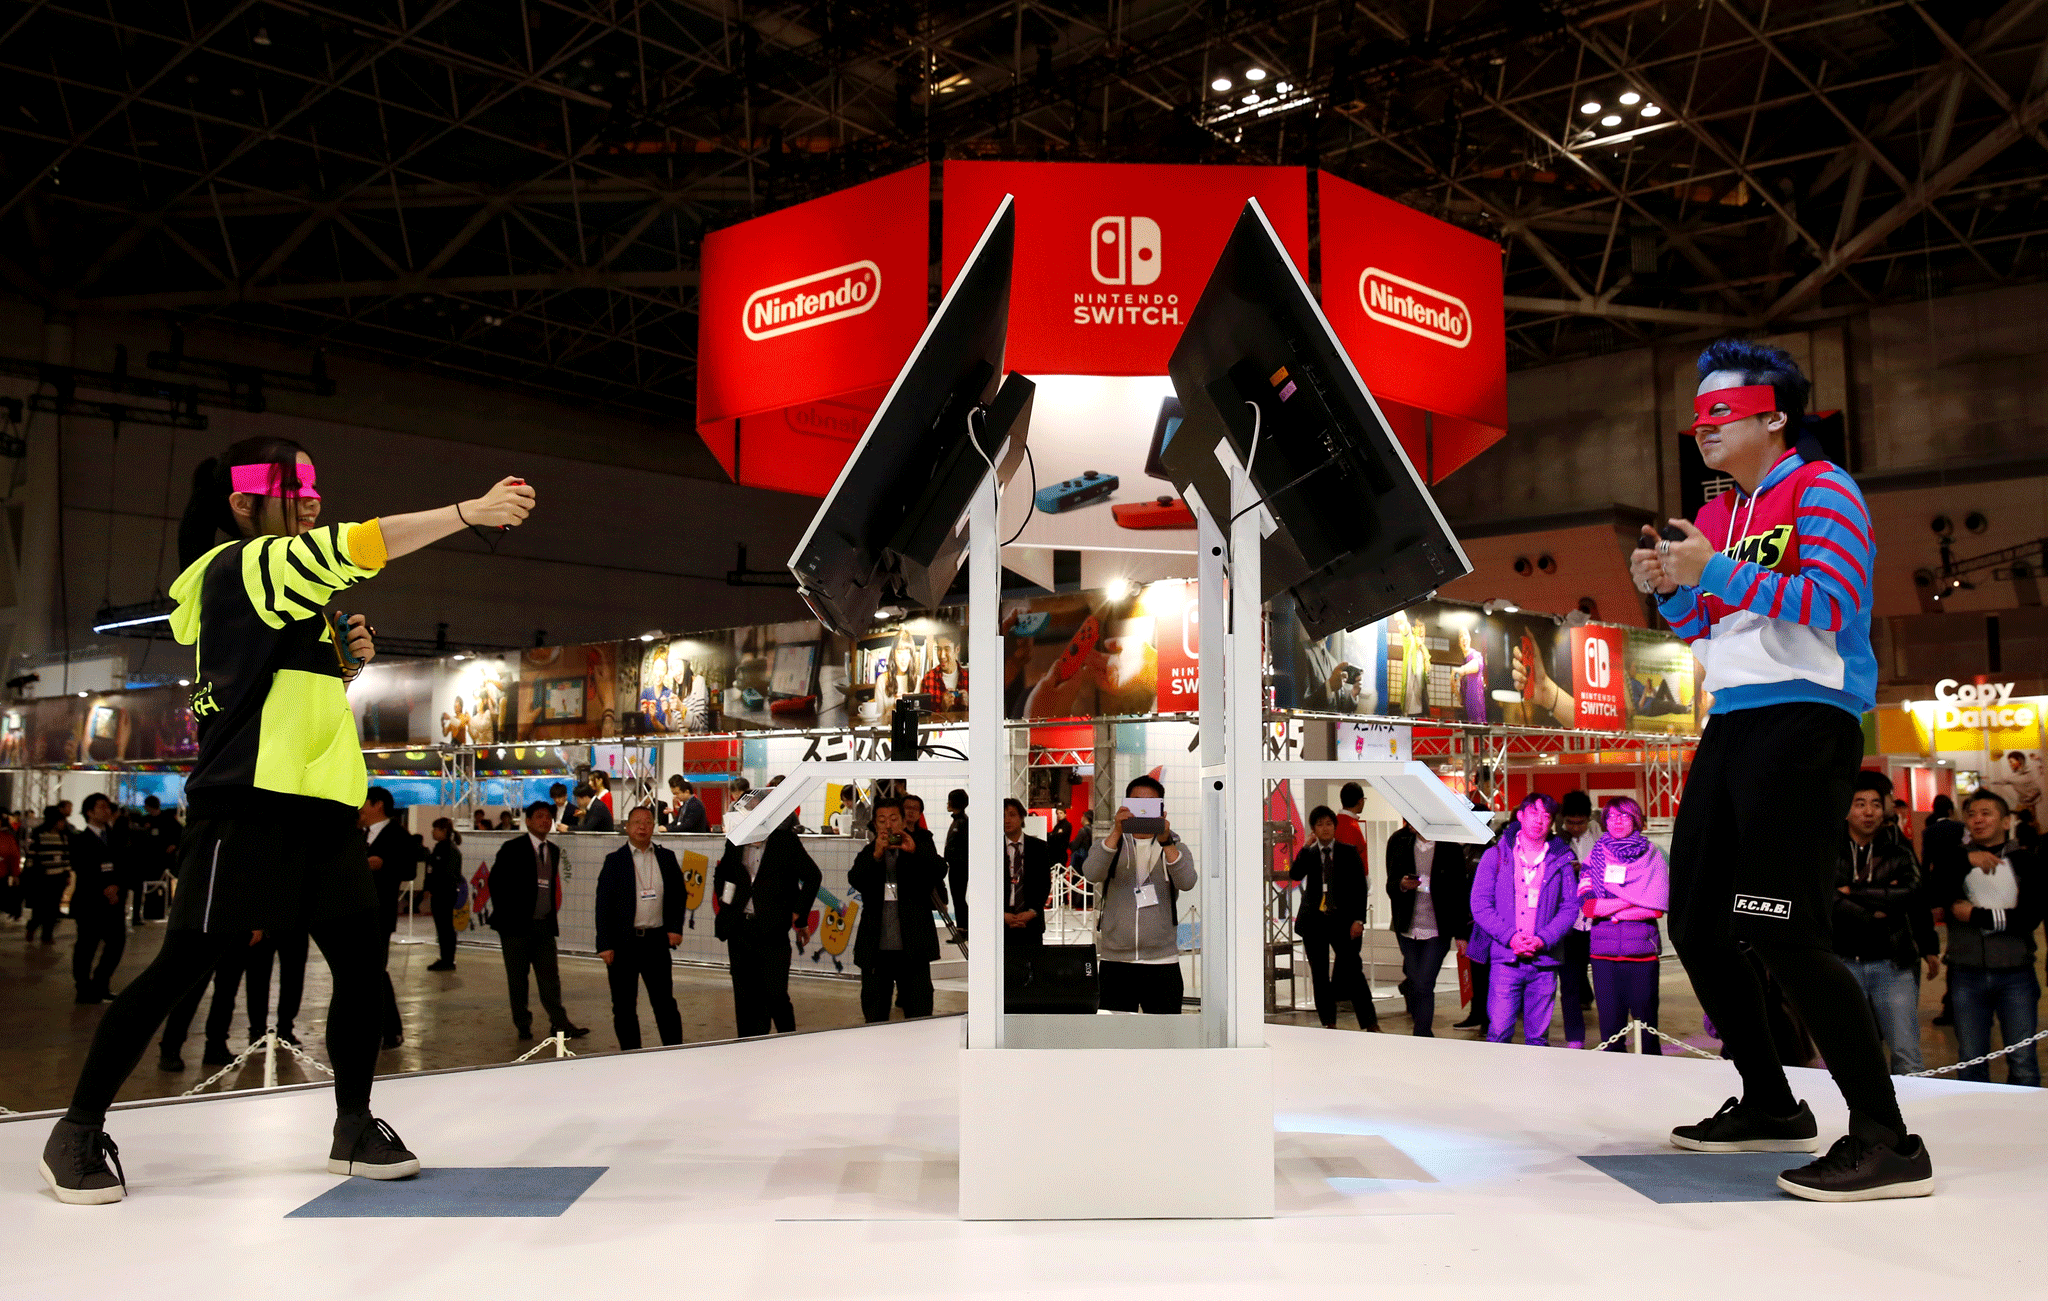 Demonstrators play Nintendo's Arms game with its new game console Switch at its experience venue in Tokyo